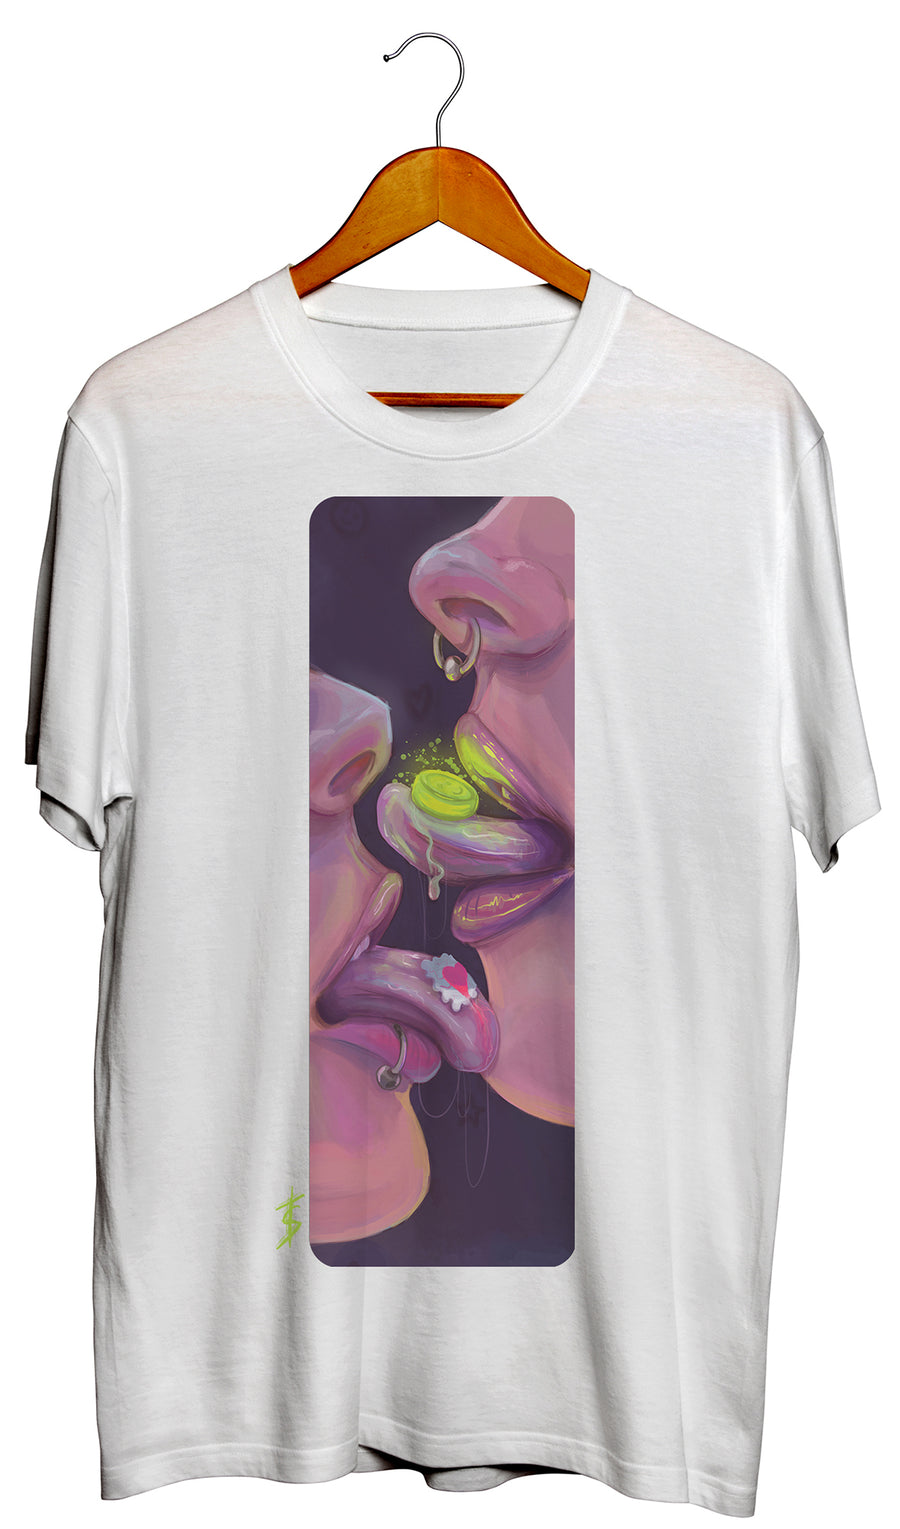 Acid and Molly White Tee